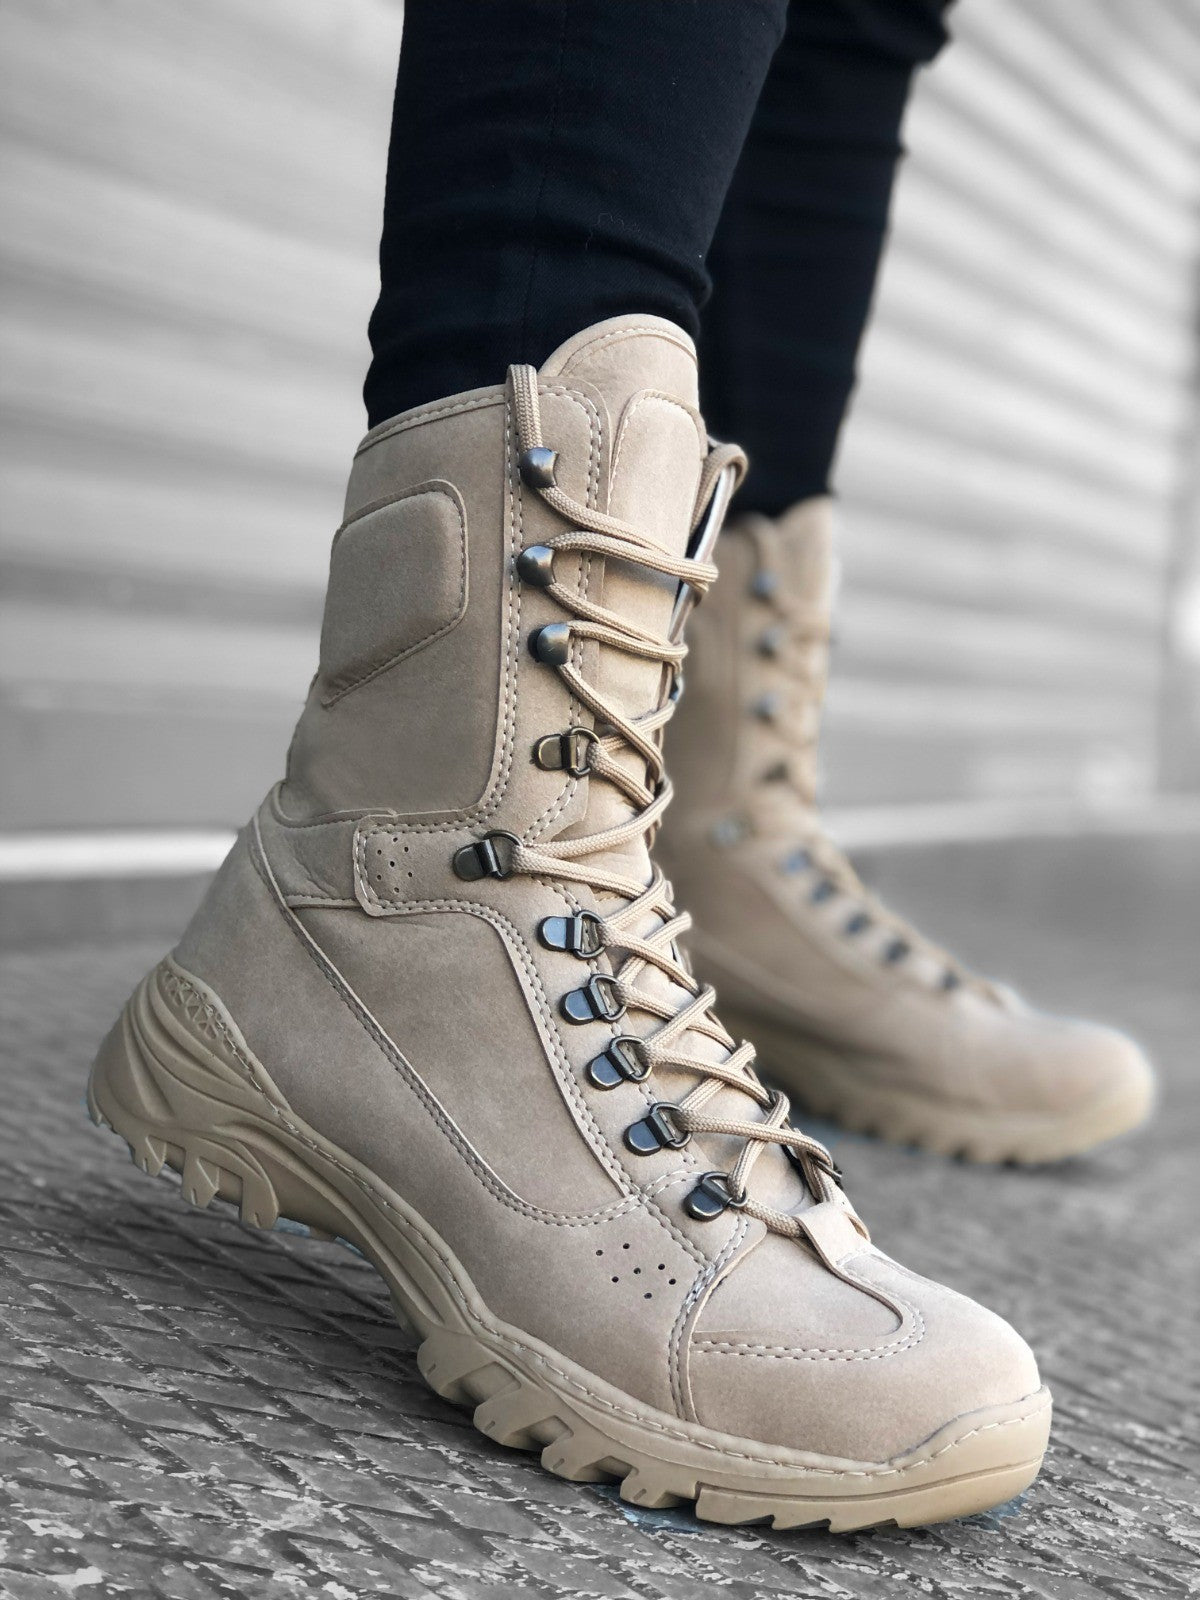 BA0605 Lace-Up Cream Military Boots - STREETMODE™